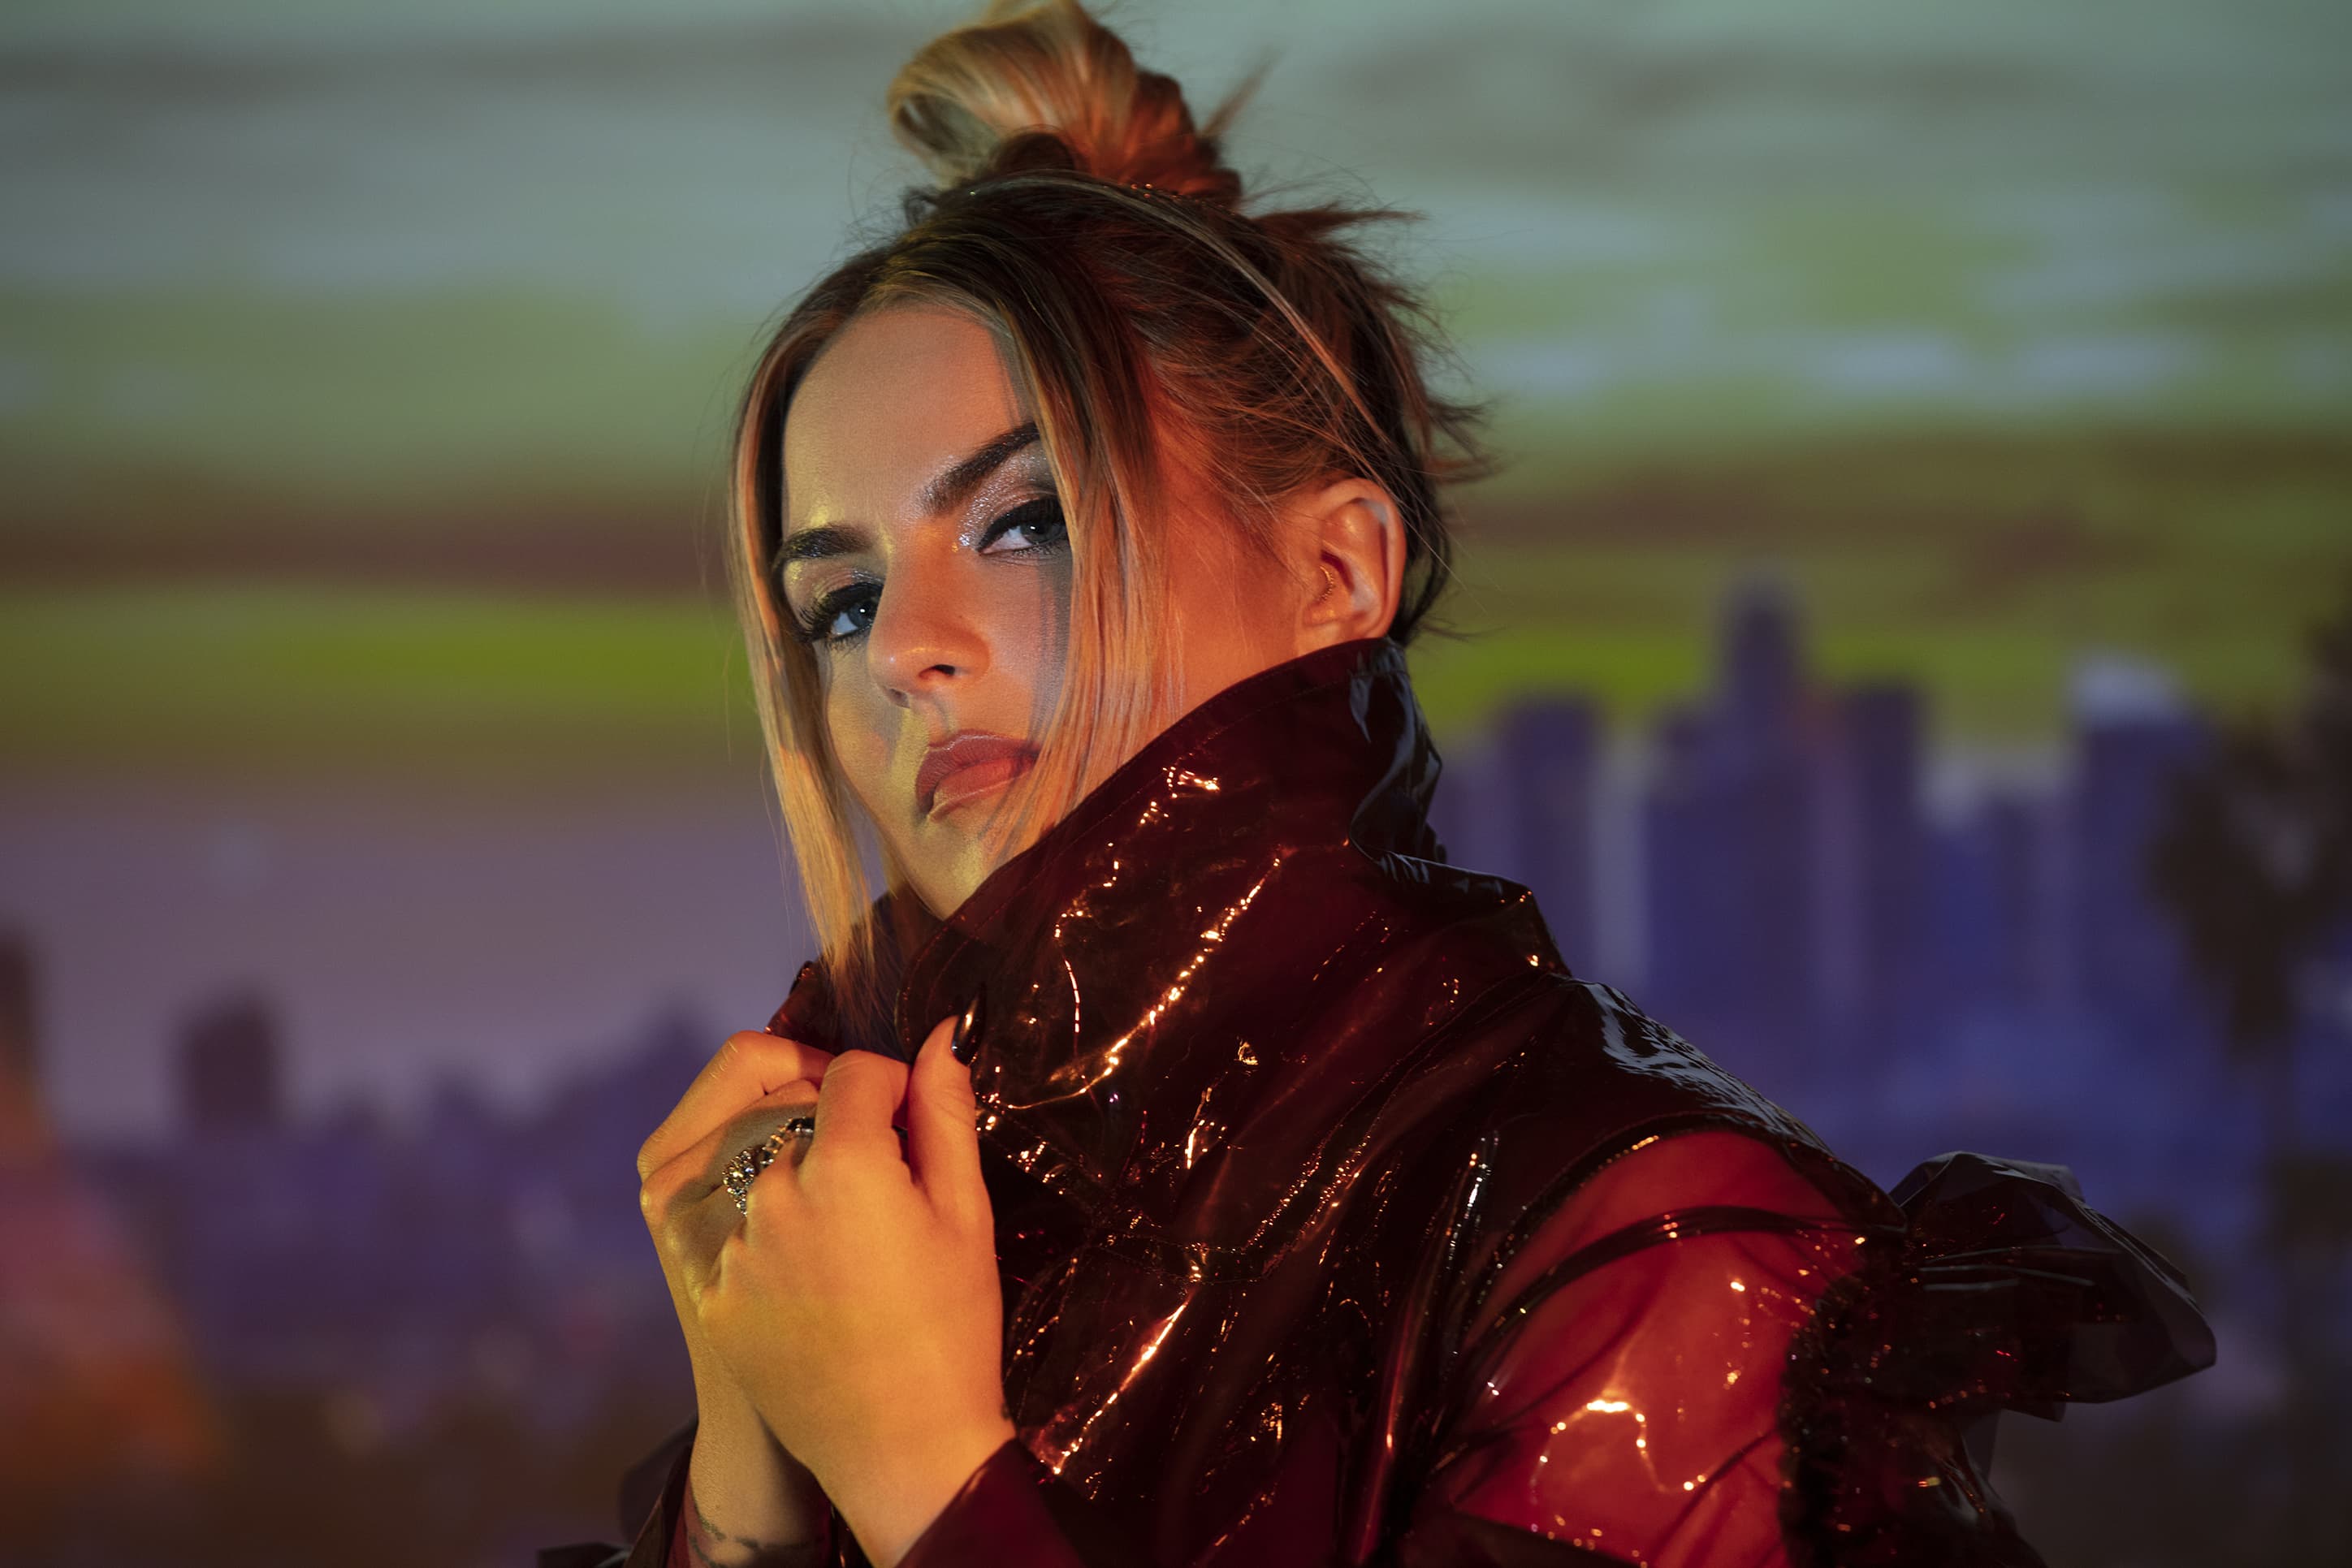 Singer JoJo Is Back With A New Album And Telling Her Side Of The Story | The ARTery